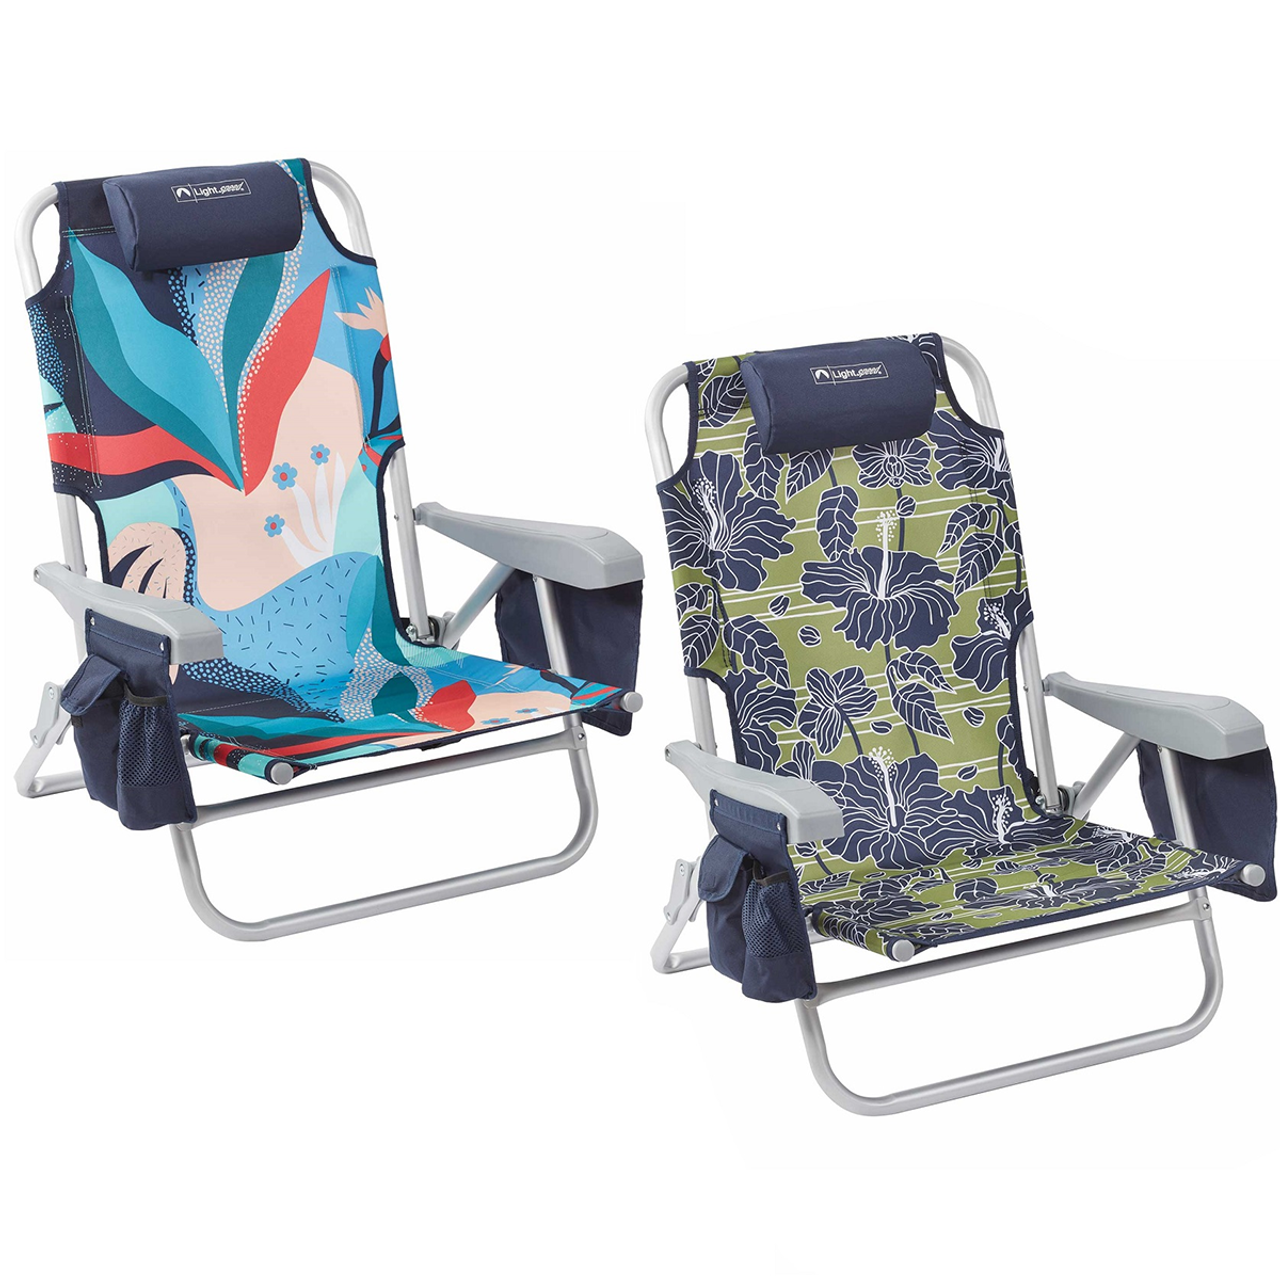 Ultimate Backpack Adjustable Beach Chair by Lightspeed® (2-Pack) product image